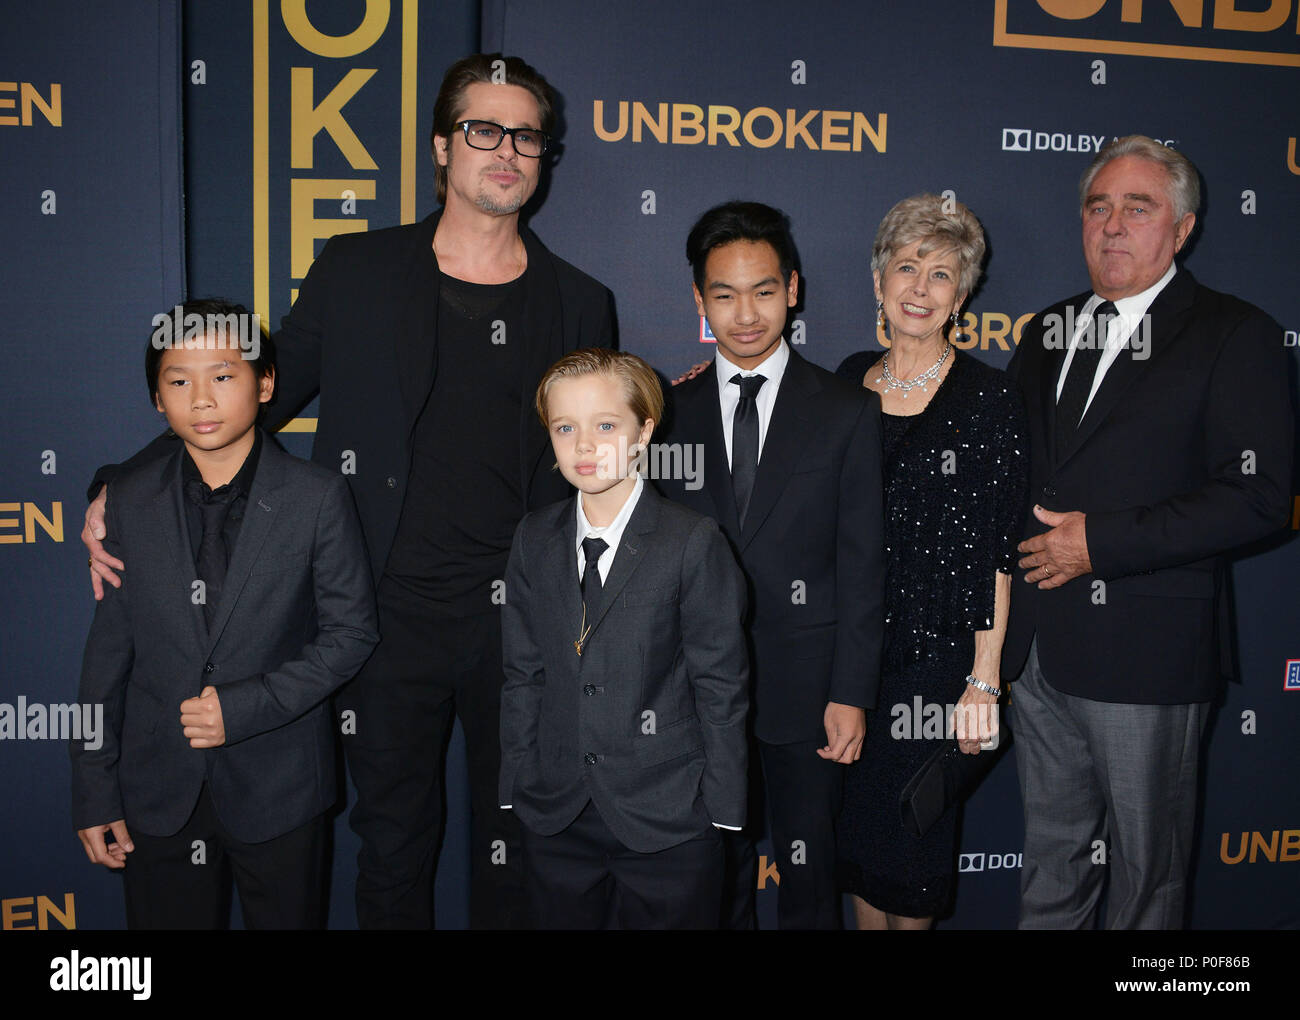 a  Brad Pitt, (L-R) Pax Thien Jolie-Pitt, Shiloh Nouvel Jolie-Pitt,, Maddox Jolie-Pitt, Jane Pitt, and William Pitt 045  at the Unbroken Premiere at the Dolby Theatre in Los Angeles. Dec. 14, 2014a  Brad Pitt, (L-R) Pax Thien Jolie-Pitt, Shiloh Nouvel Jolie-Pitt,, Maddox Jolie-Pitt, Jane Pitt, and William Pitt 045 ------------- Red Carpet Event, Vertical, USA, Film Industry, Celebrities,  Photography, Bestof, Arts Culture and Entertainment, Topix Celebrities fashion /  Vertical, Best of, Event in Hollywood Life - California,  Red Carpet and backstage, USA, Film Industry, Celebrities,  movie ce Stock Photo